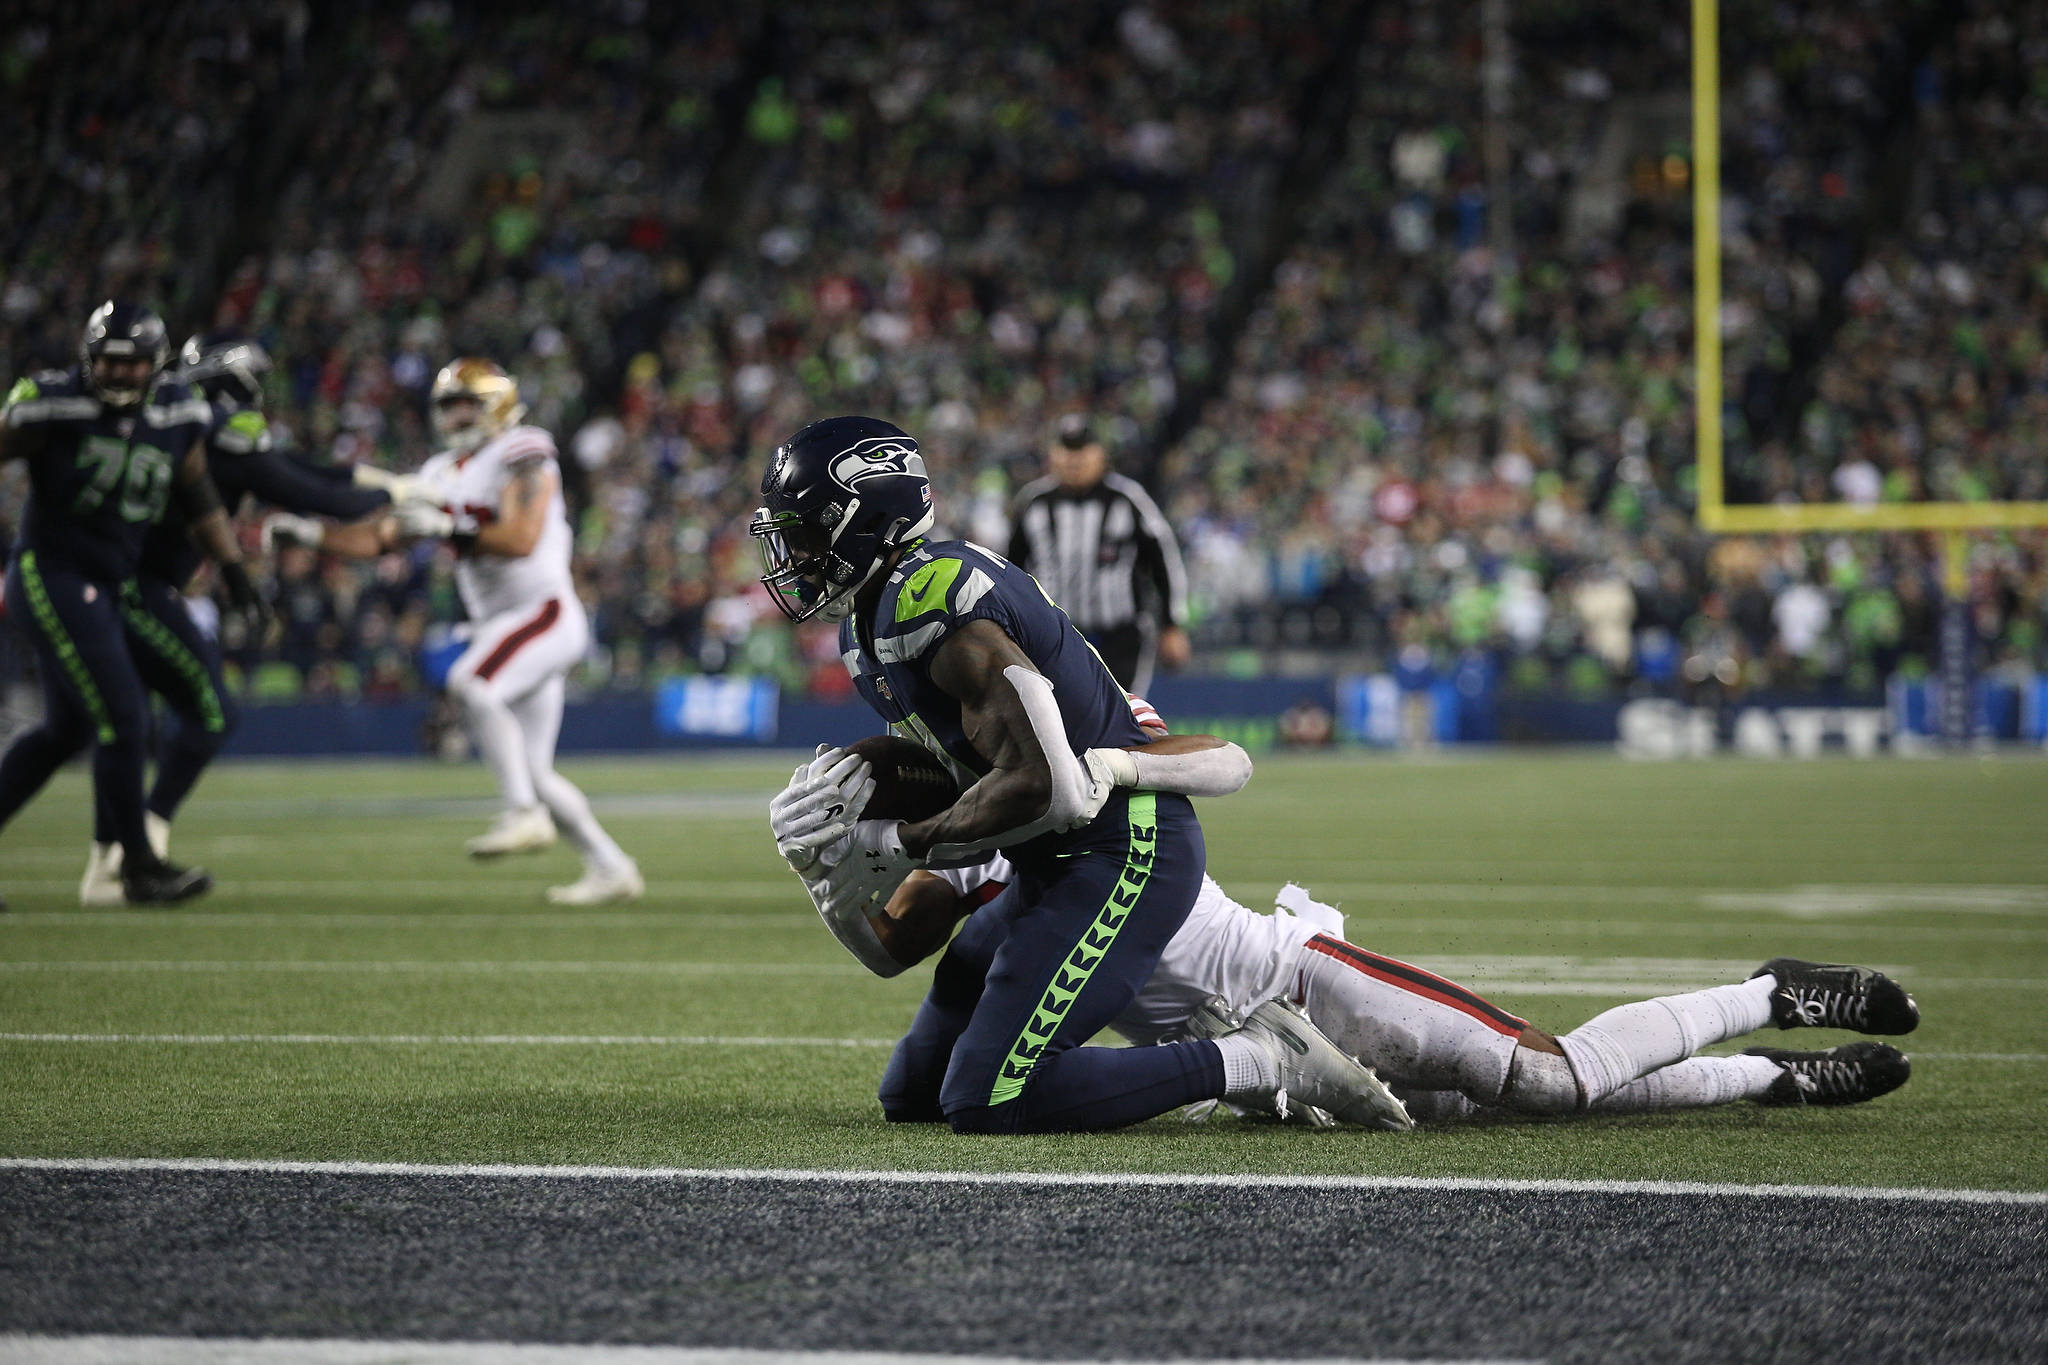 Seattle Seahawks DK Metcalf hauls in a pass just short of the end zone. The Seahawks lost to the San Francisco 49ers 26-21 at CenturyLink Field on Sunday, Dec. 29, 2019 in Seattle, Wash. (Andy Bronson / The Herald)